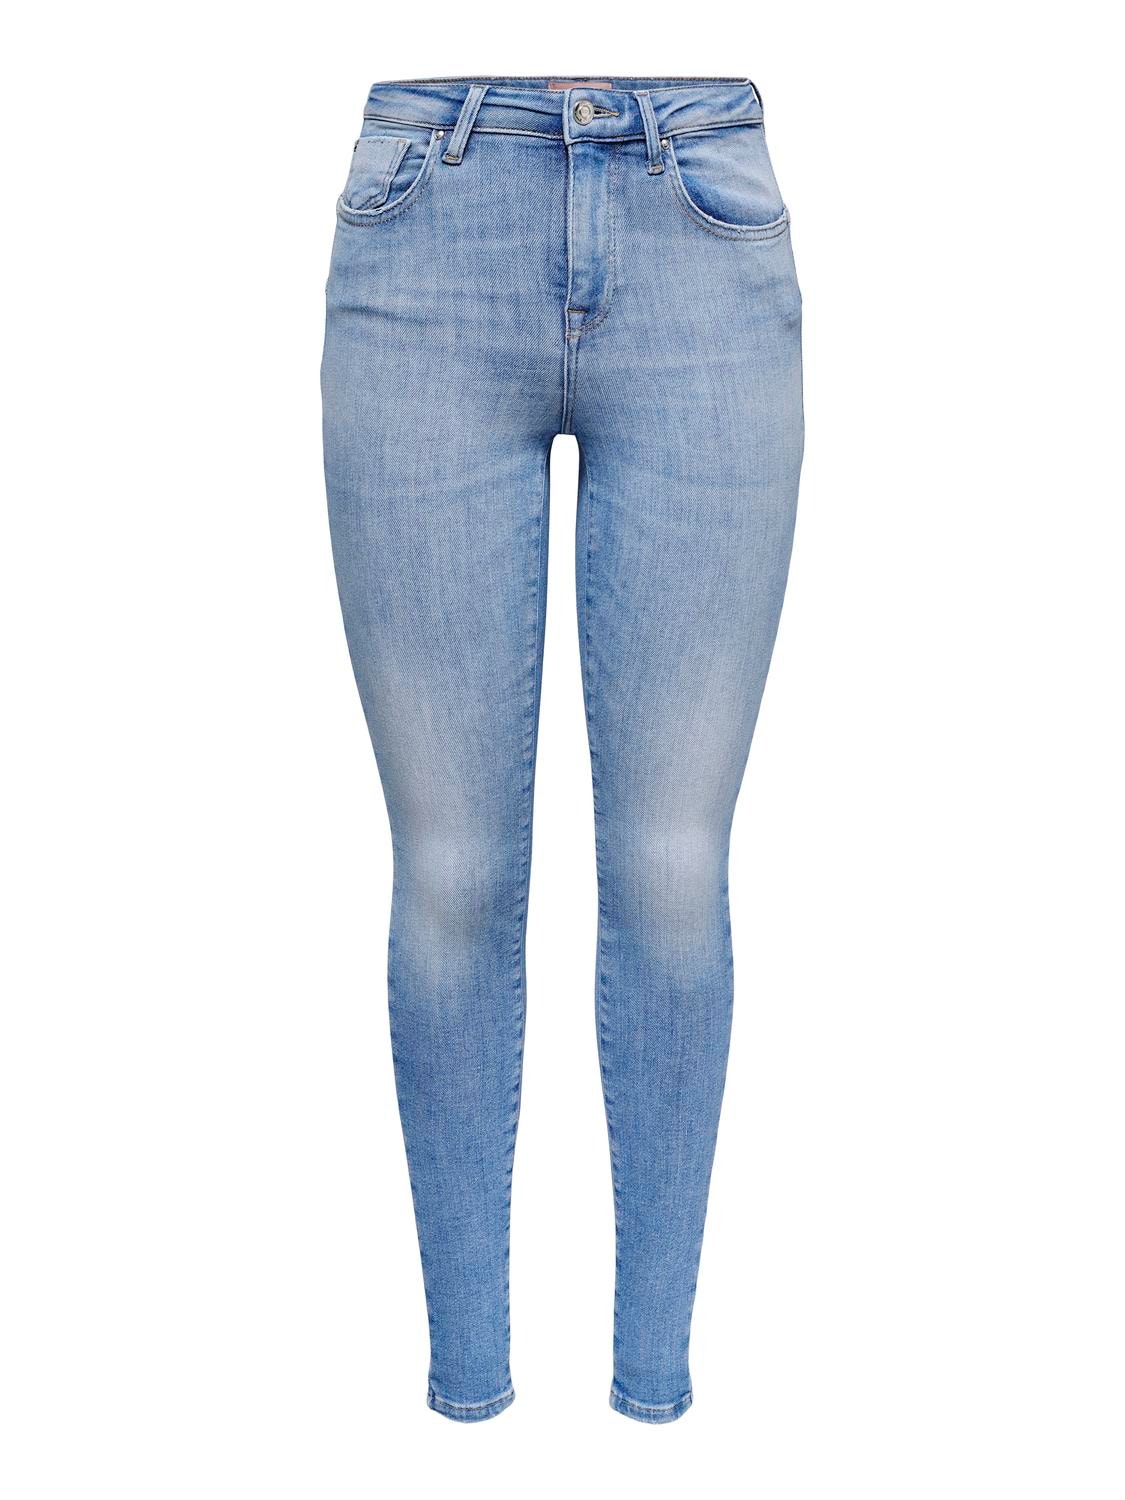 ONLY ONLPower Push-up- Skinny Fit Jeans -Special Bright Blue Denim - 15250273